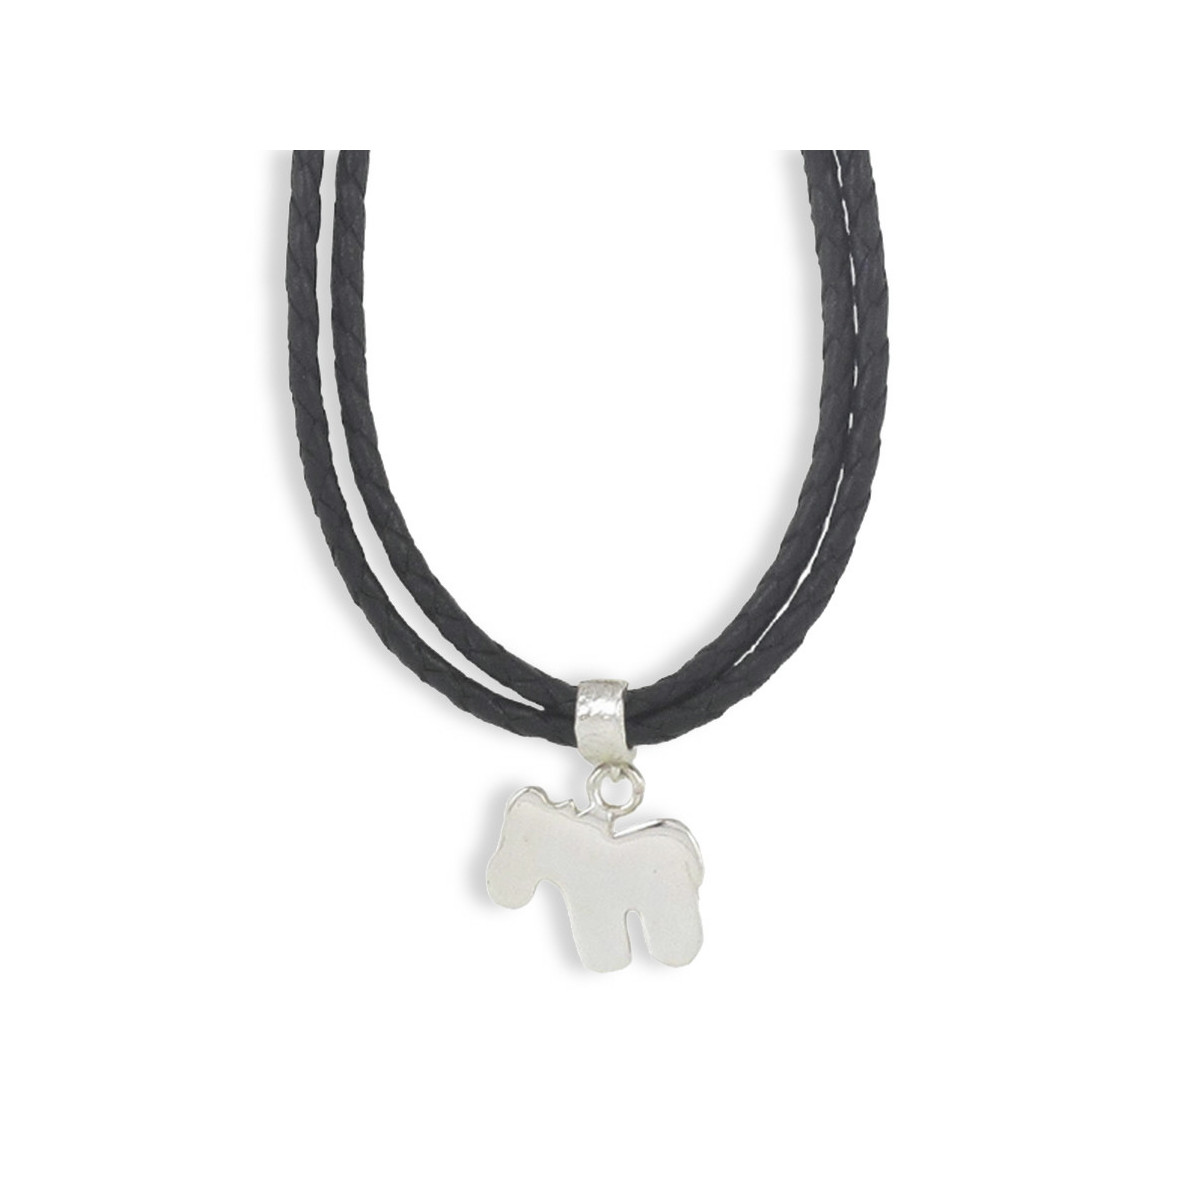 LEATHER NECKLACE SILVER PENDANT